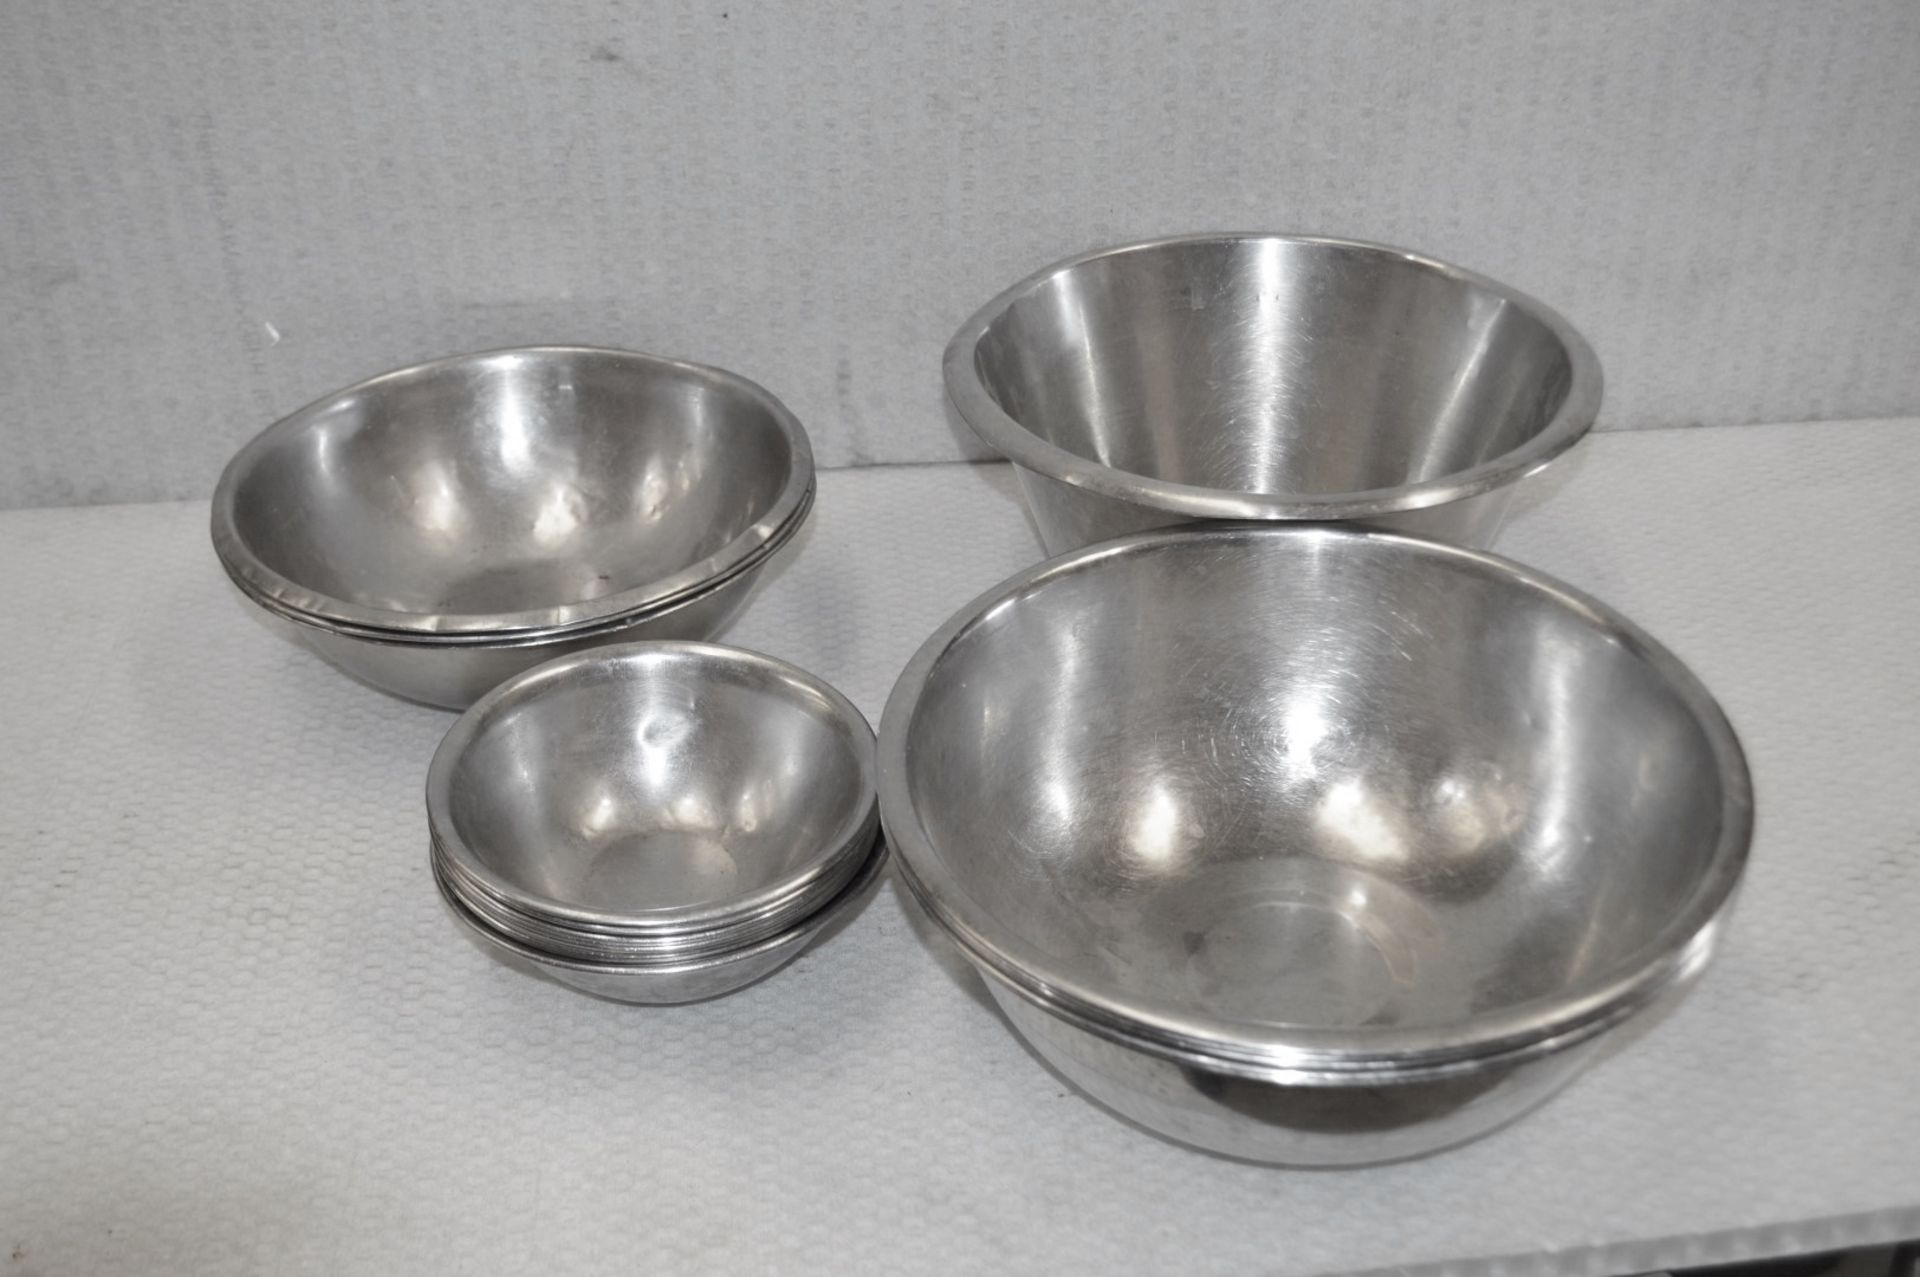 19 x Stainless Steel Mixing  Bowls For Commercial Kitchens - Includes Small, Medium and Large - Image 2 of 6